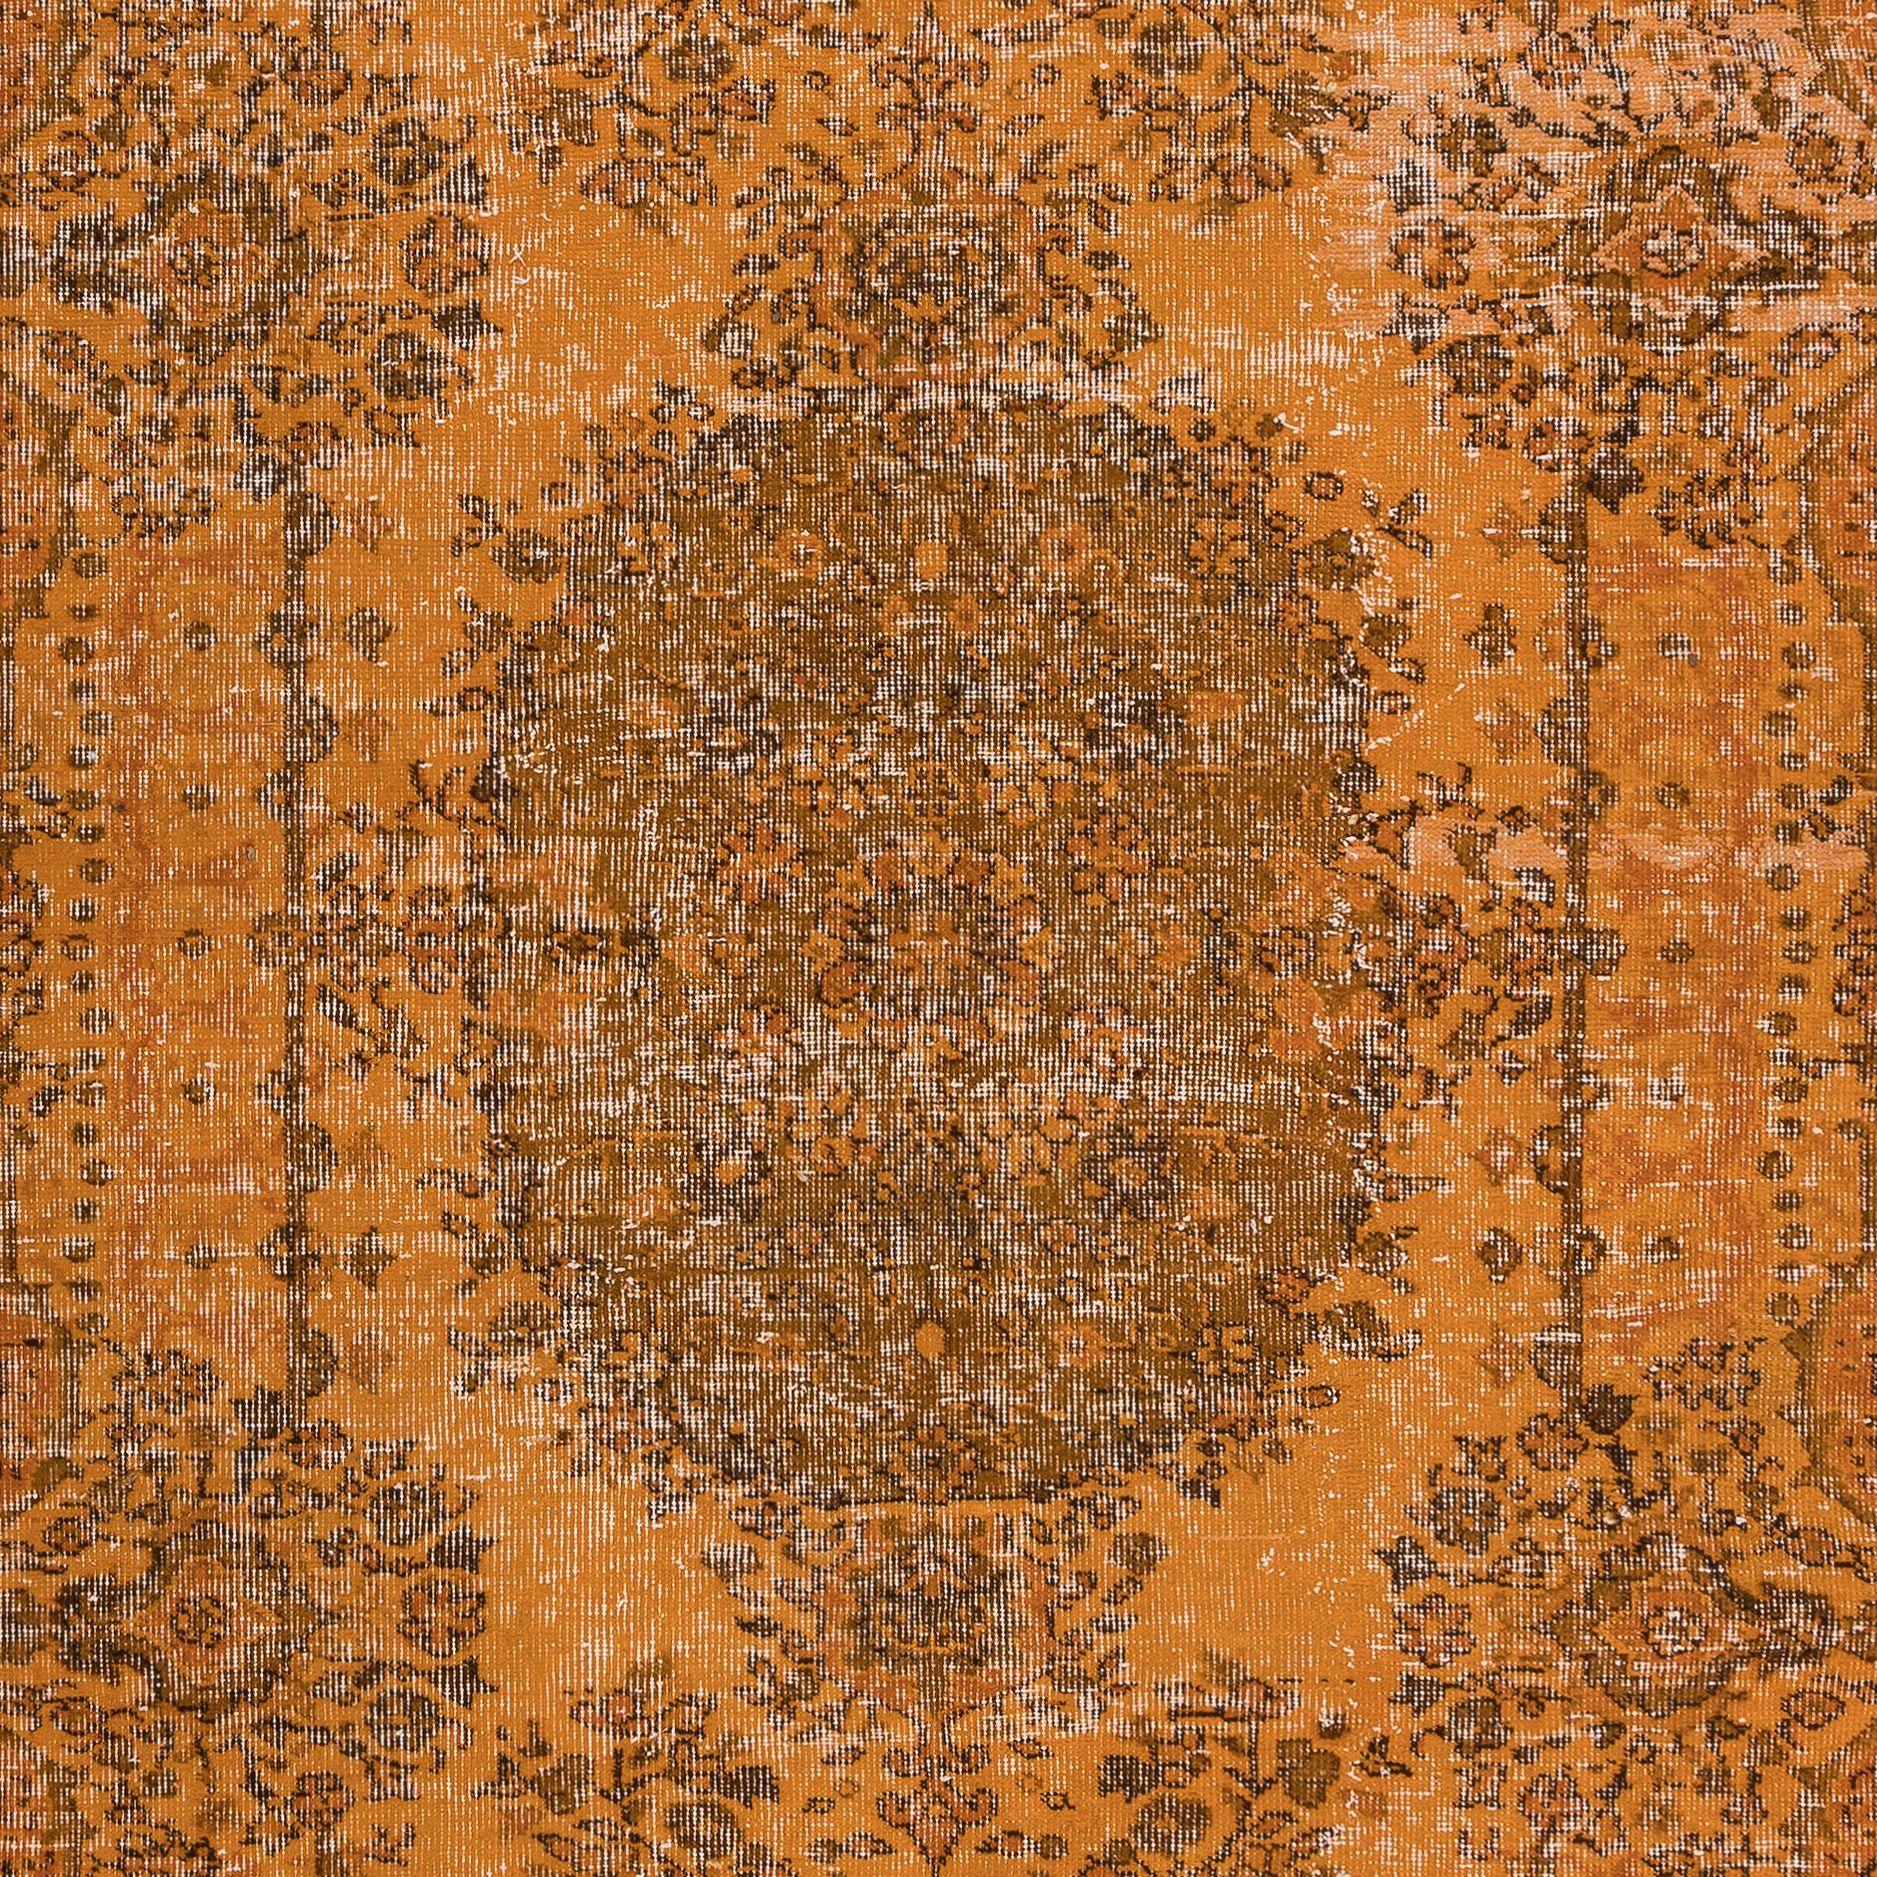 Modern 5.3x8.4 Ft Handmade Turkish Wool Area Rug ReDyed in Orange with Medallion Design For Sale